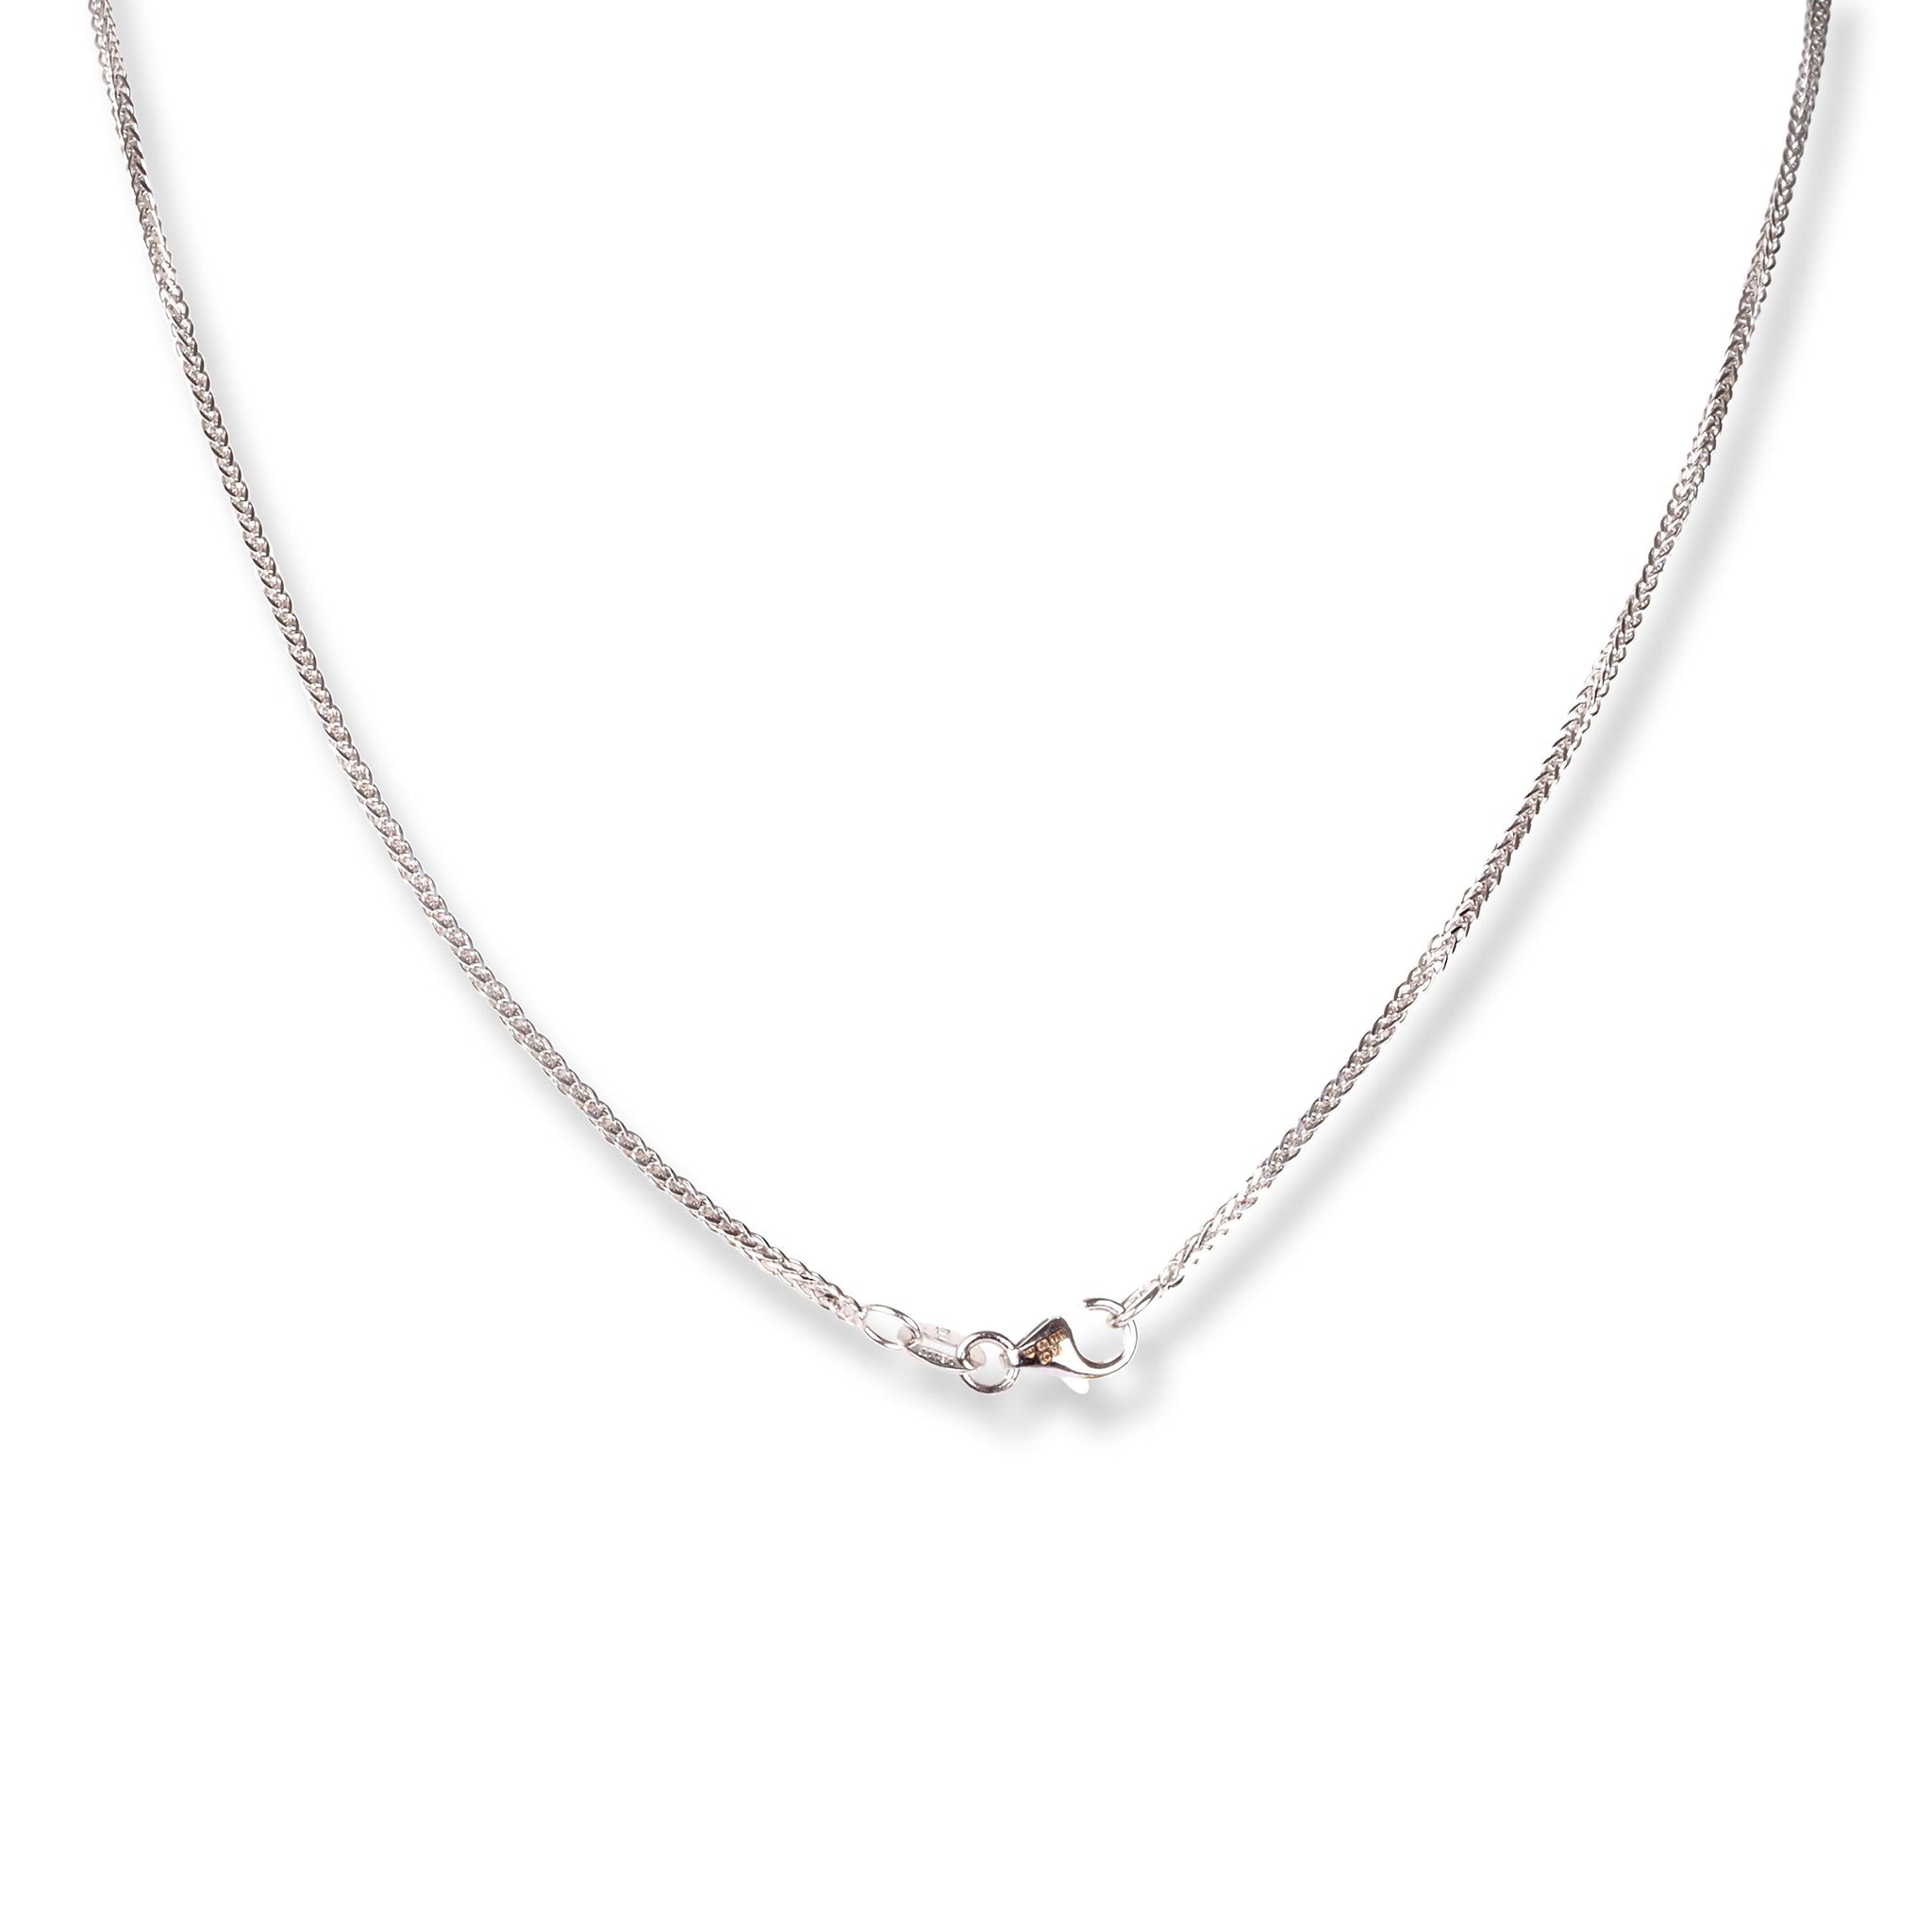 18ct White Gold Foxtail Chain with Lobster Clasp C-3803